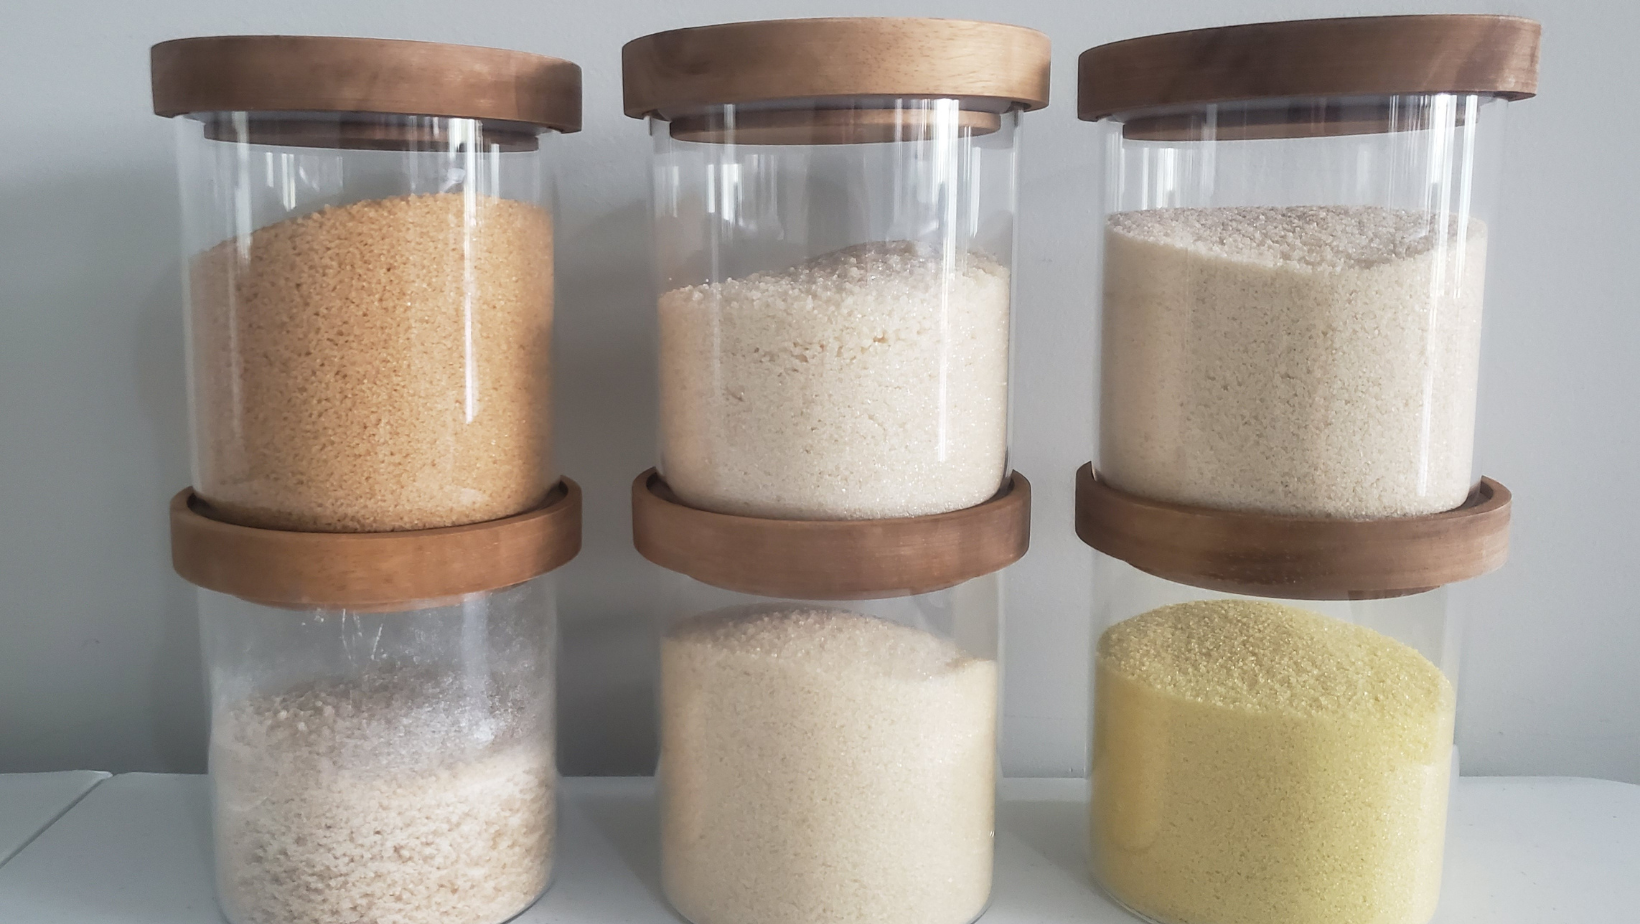 Image of sugars in glass jars